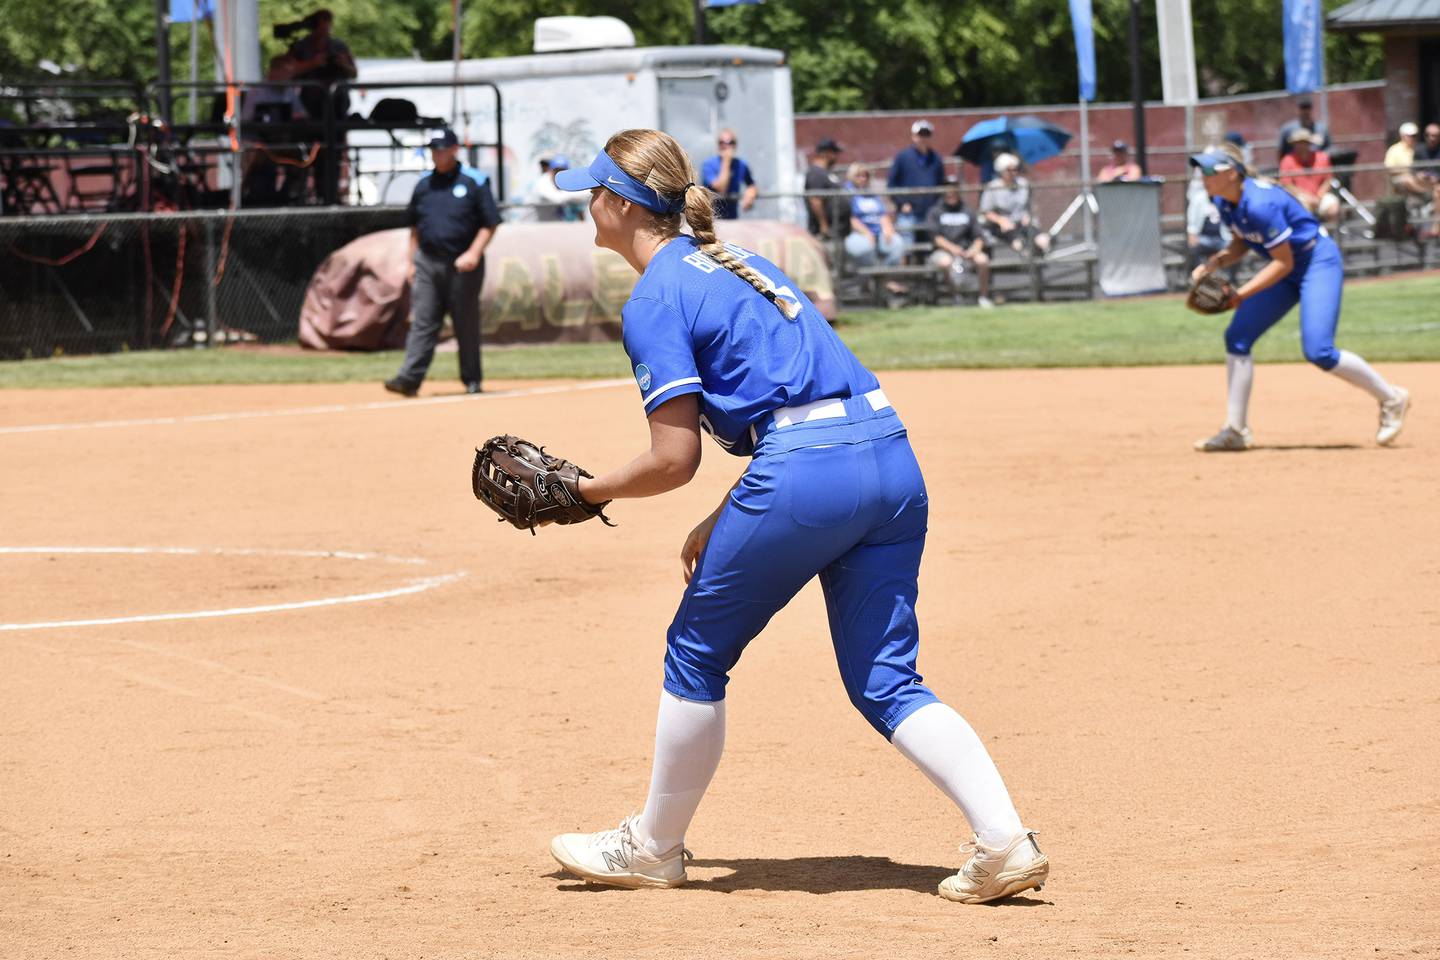 Millikin's Gretchen Gould plays first base during the NCAA Division III World Series last month in Salem, Virginia. Gould, a Sterling native, helped the Big Blue advance to the D-III championships for the first time in program history.